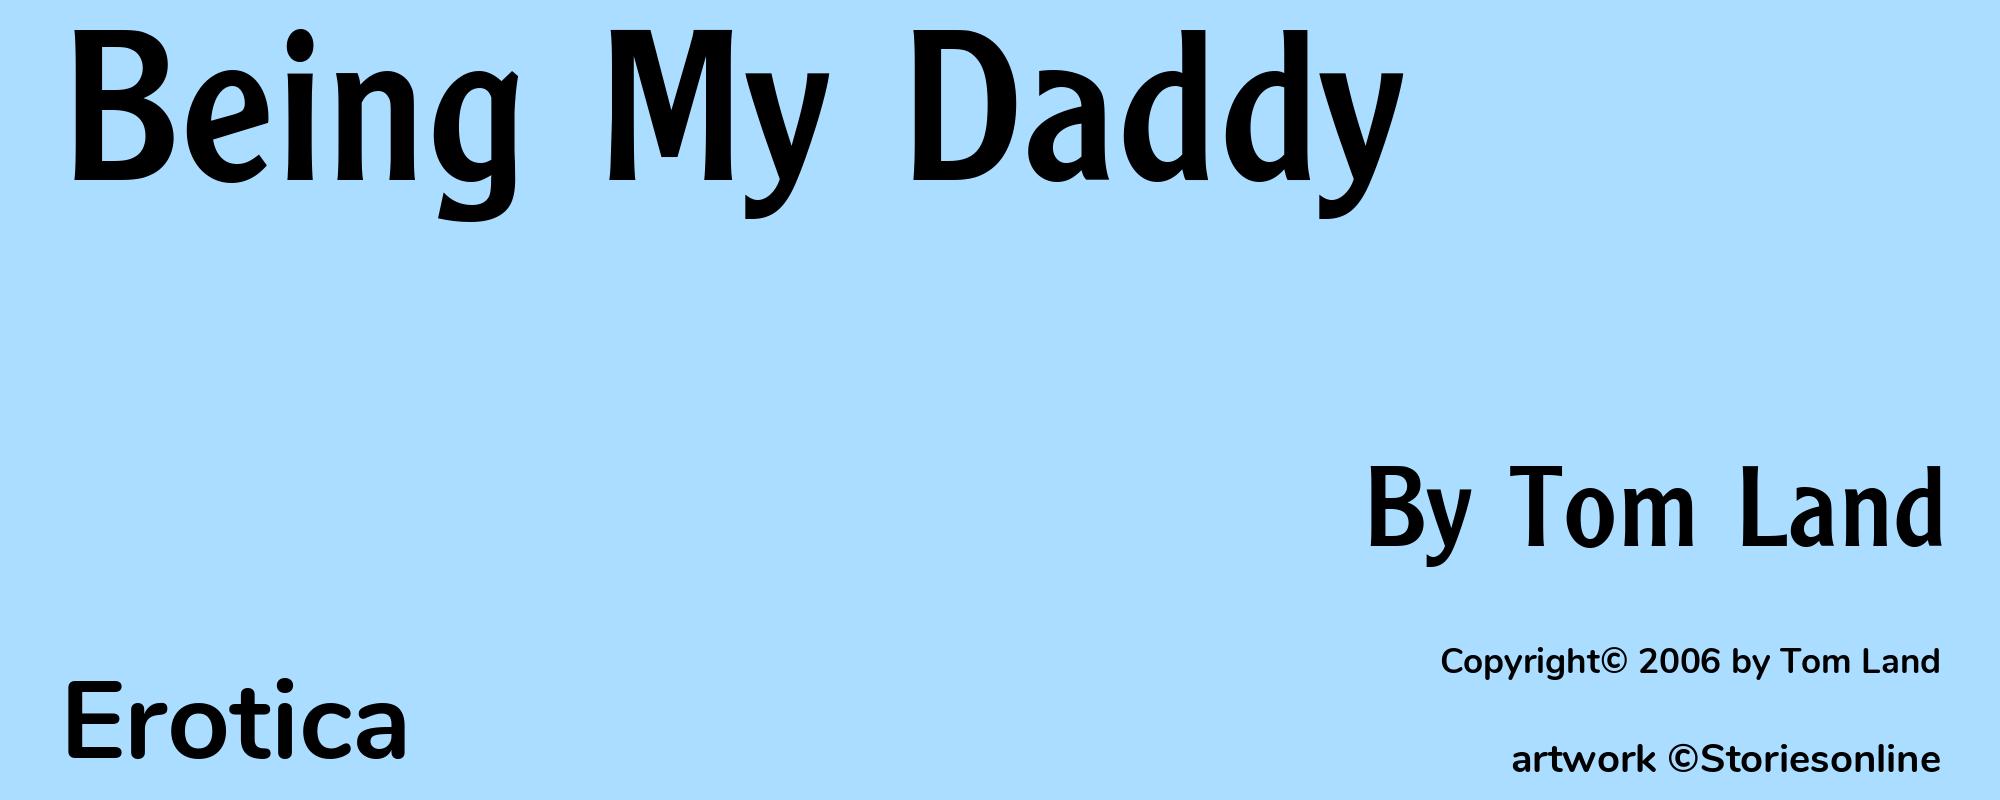 Being My Daddy - Cover